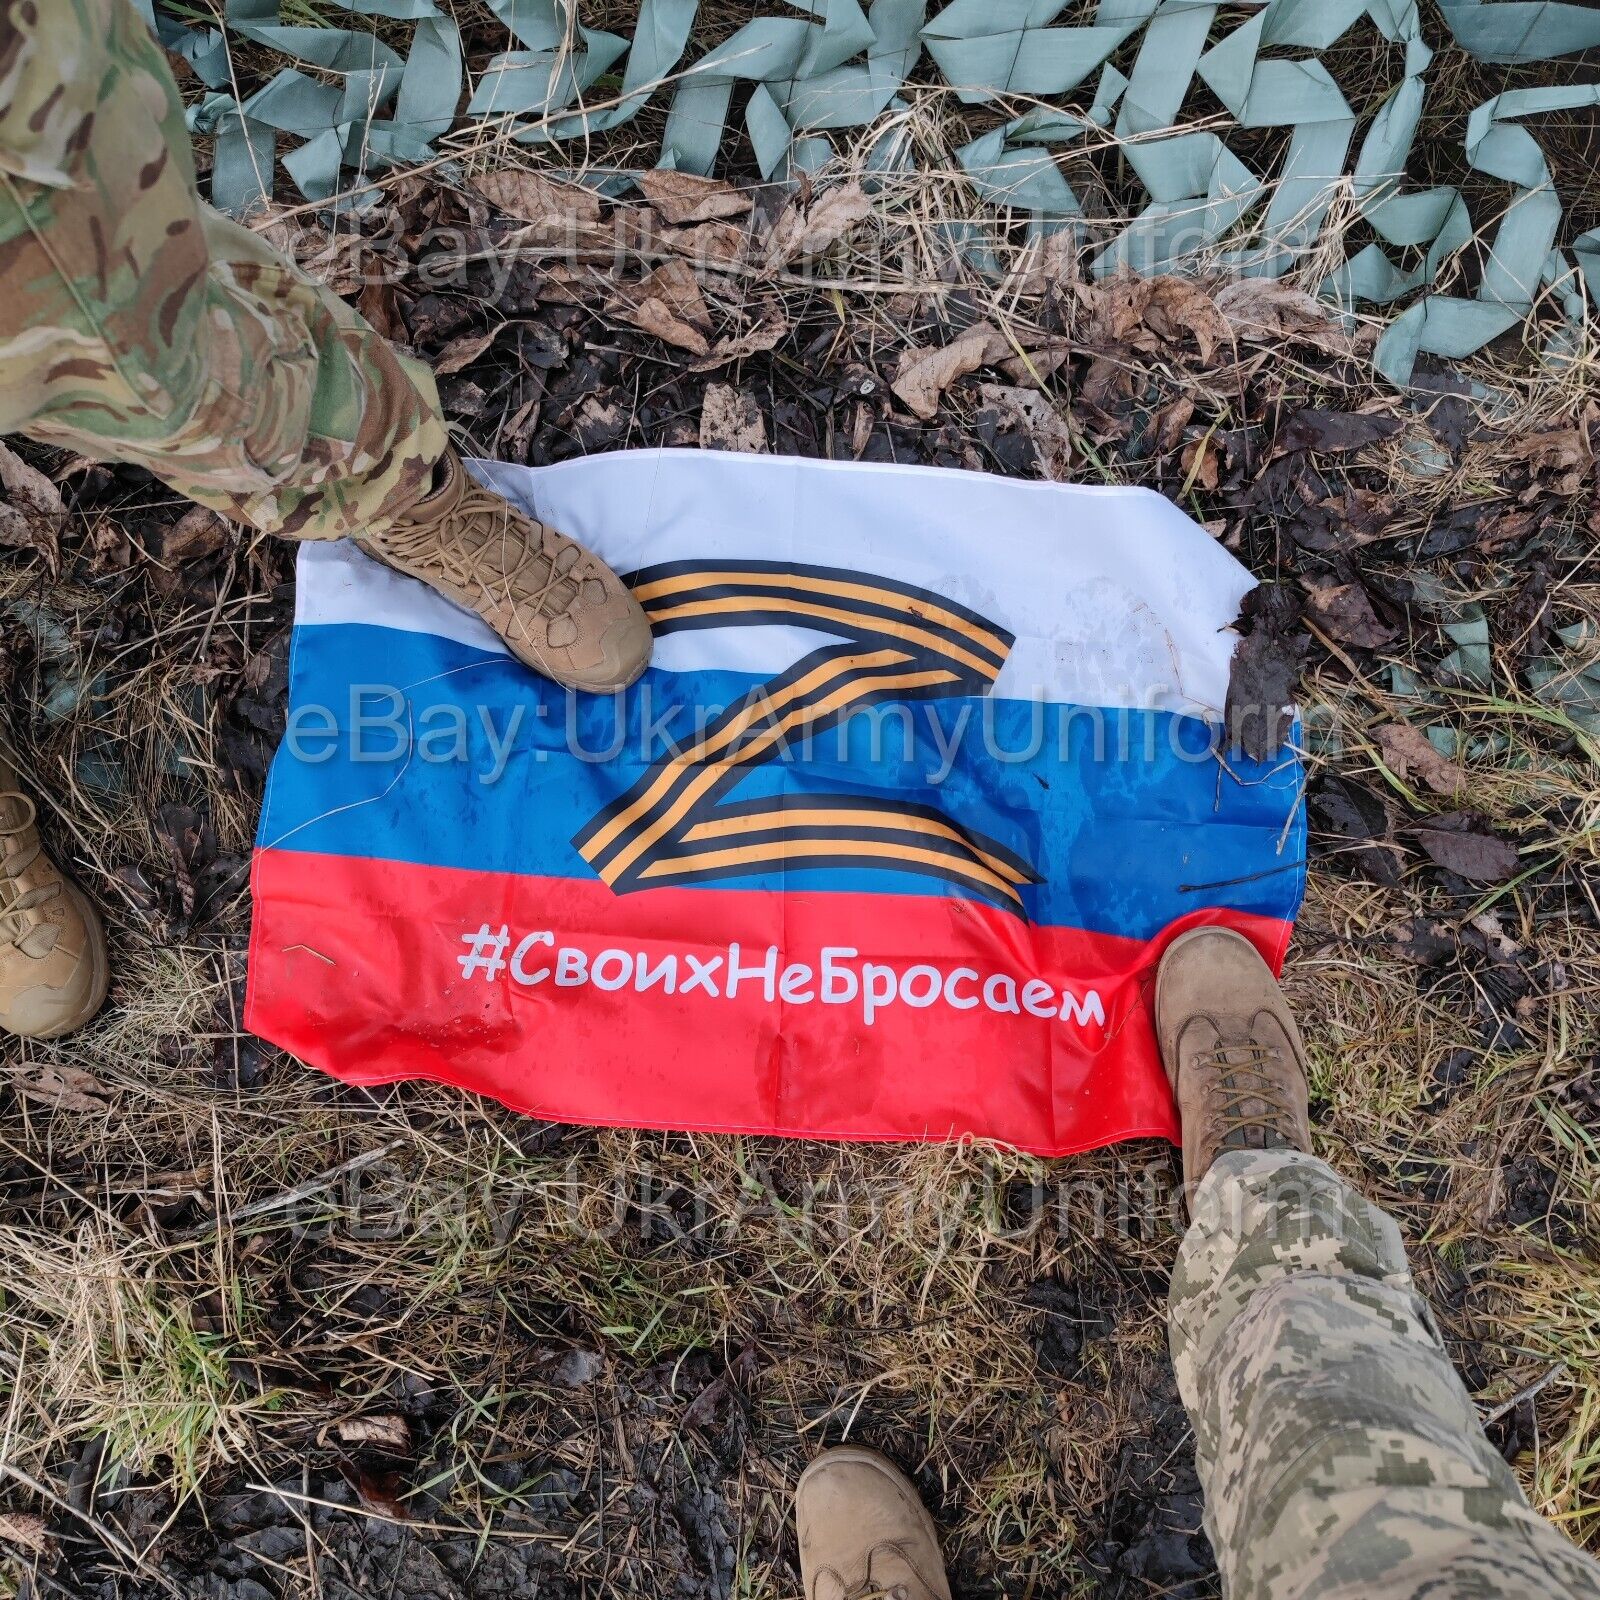 W A R trophy from russian army Flag Banner just from Avdiivka